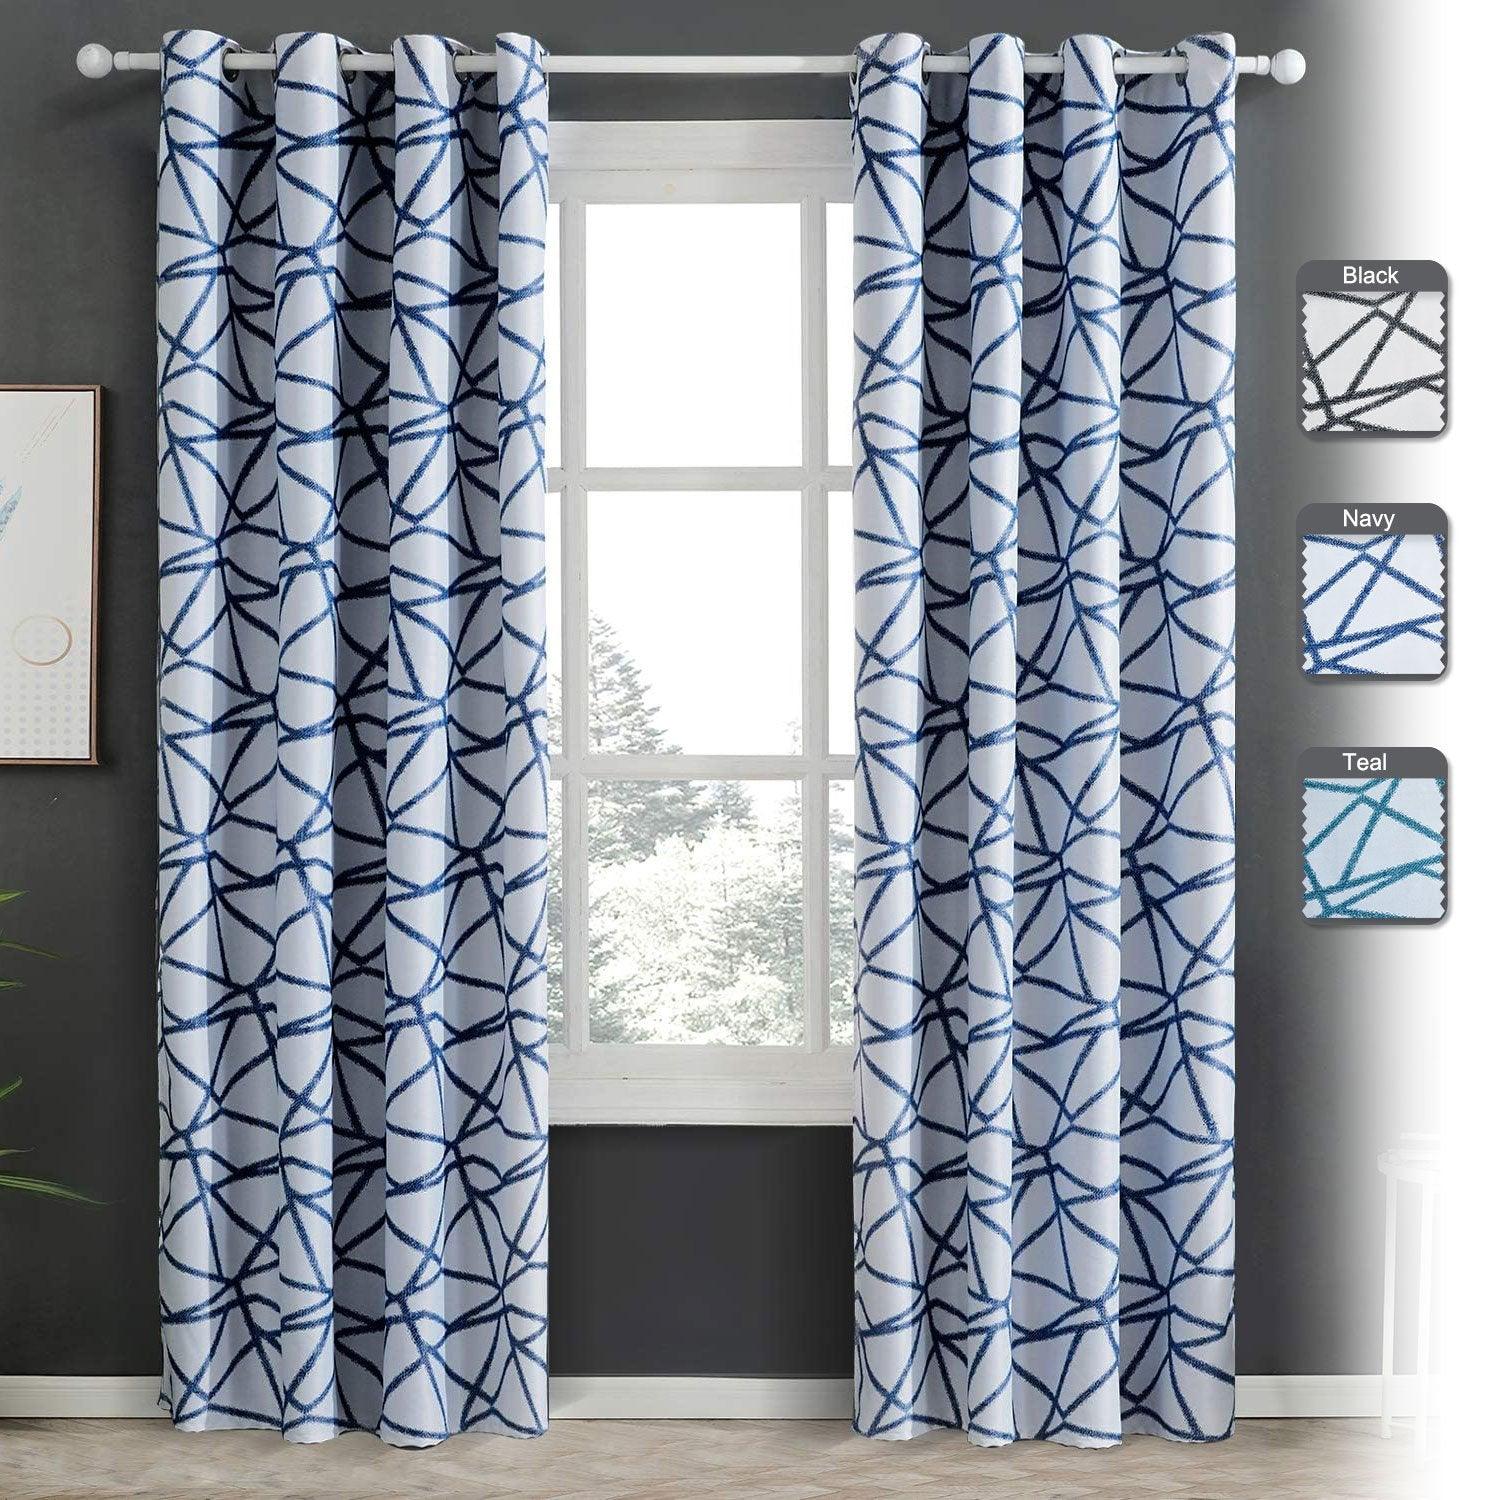 Topfinel Panels Printed Blackout Curtains for Bedroom, Winter Best Insulating Curtain - Topfinel